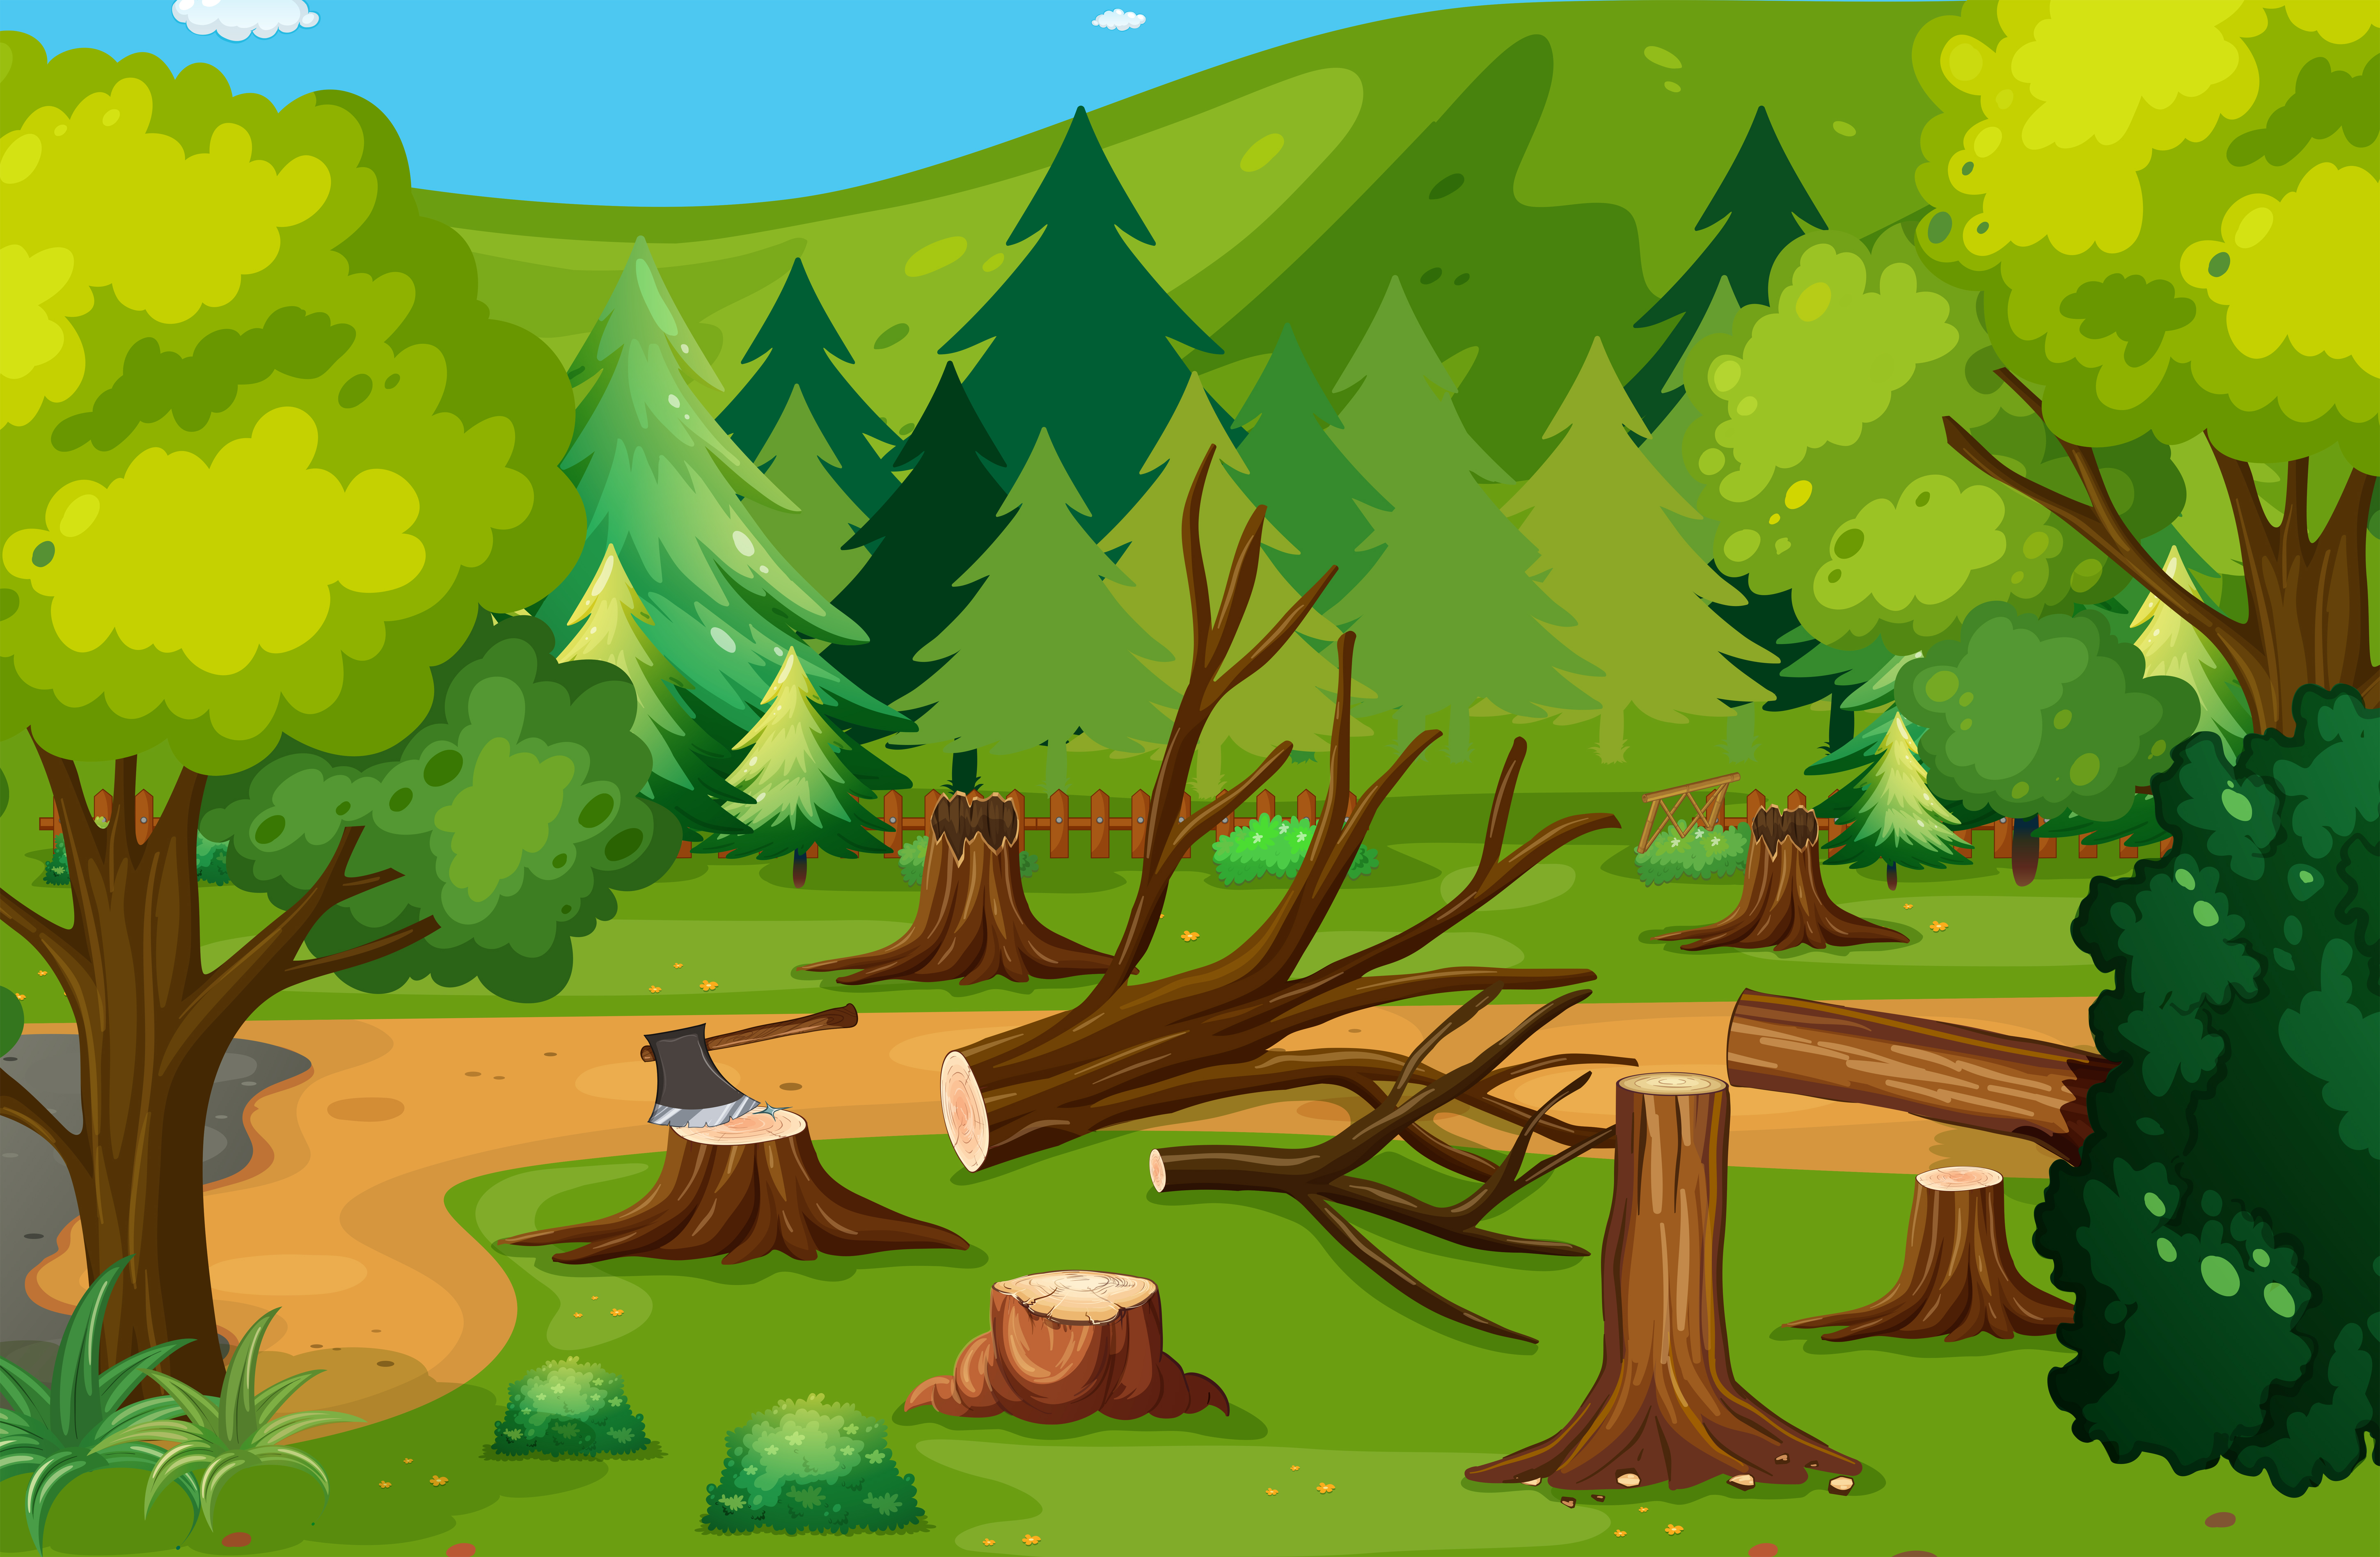 Deforestation scene with chopped woods 353135 - Download Free Vectors